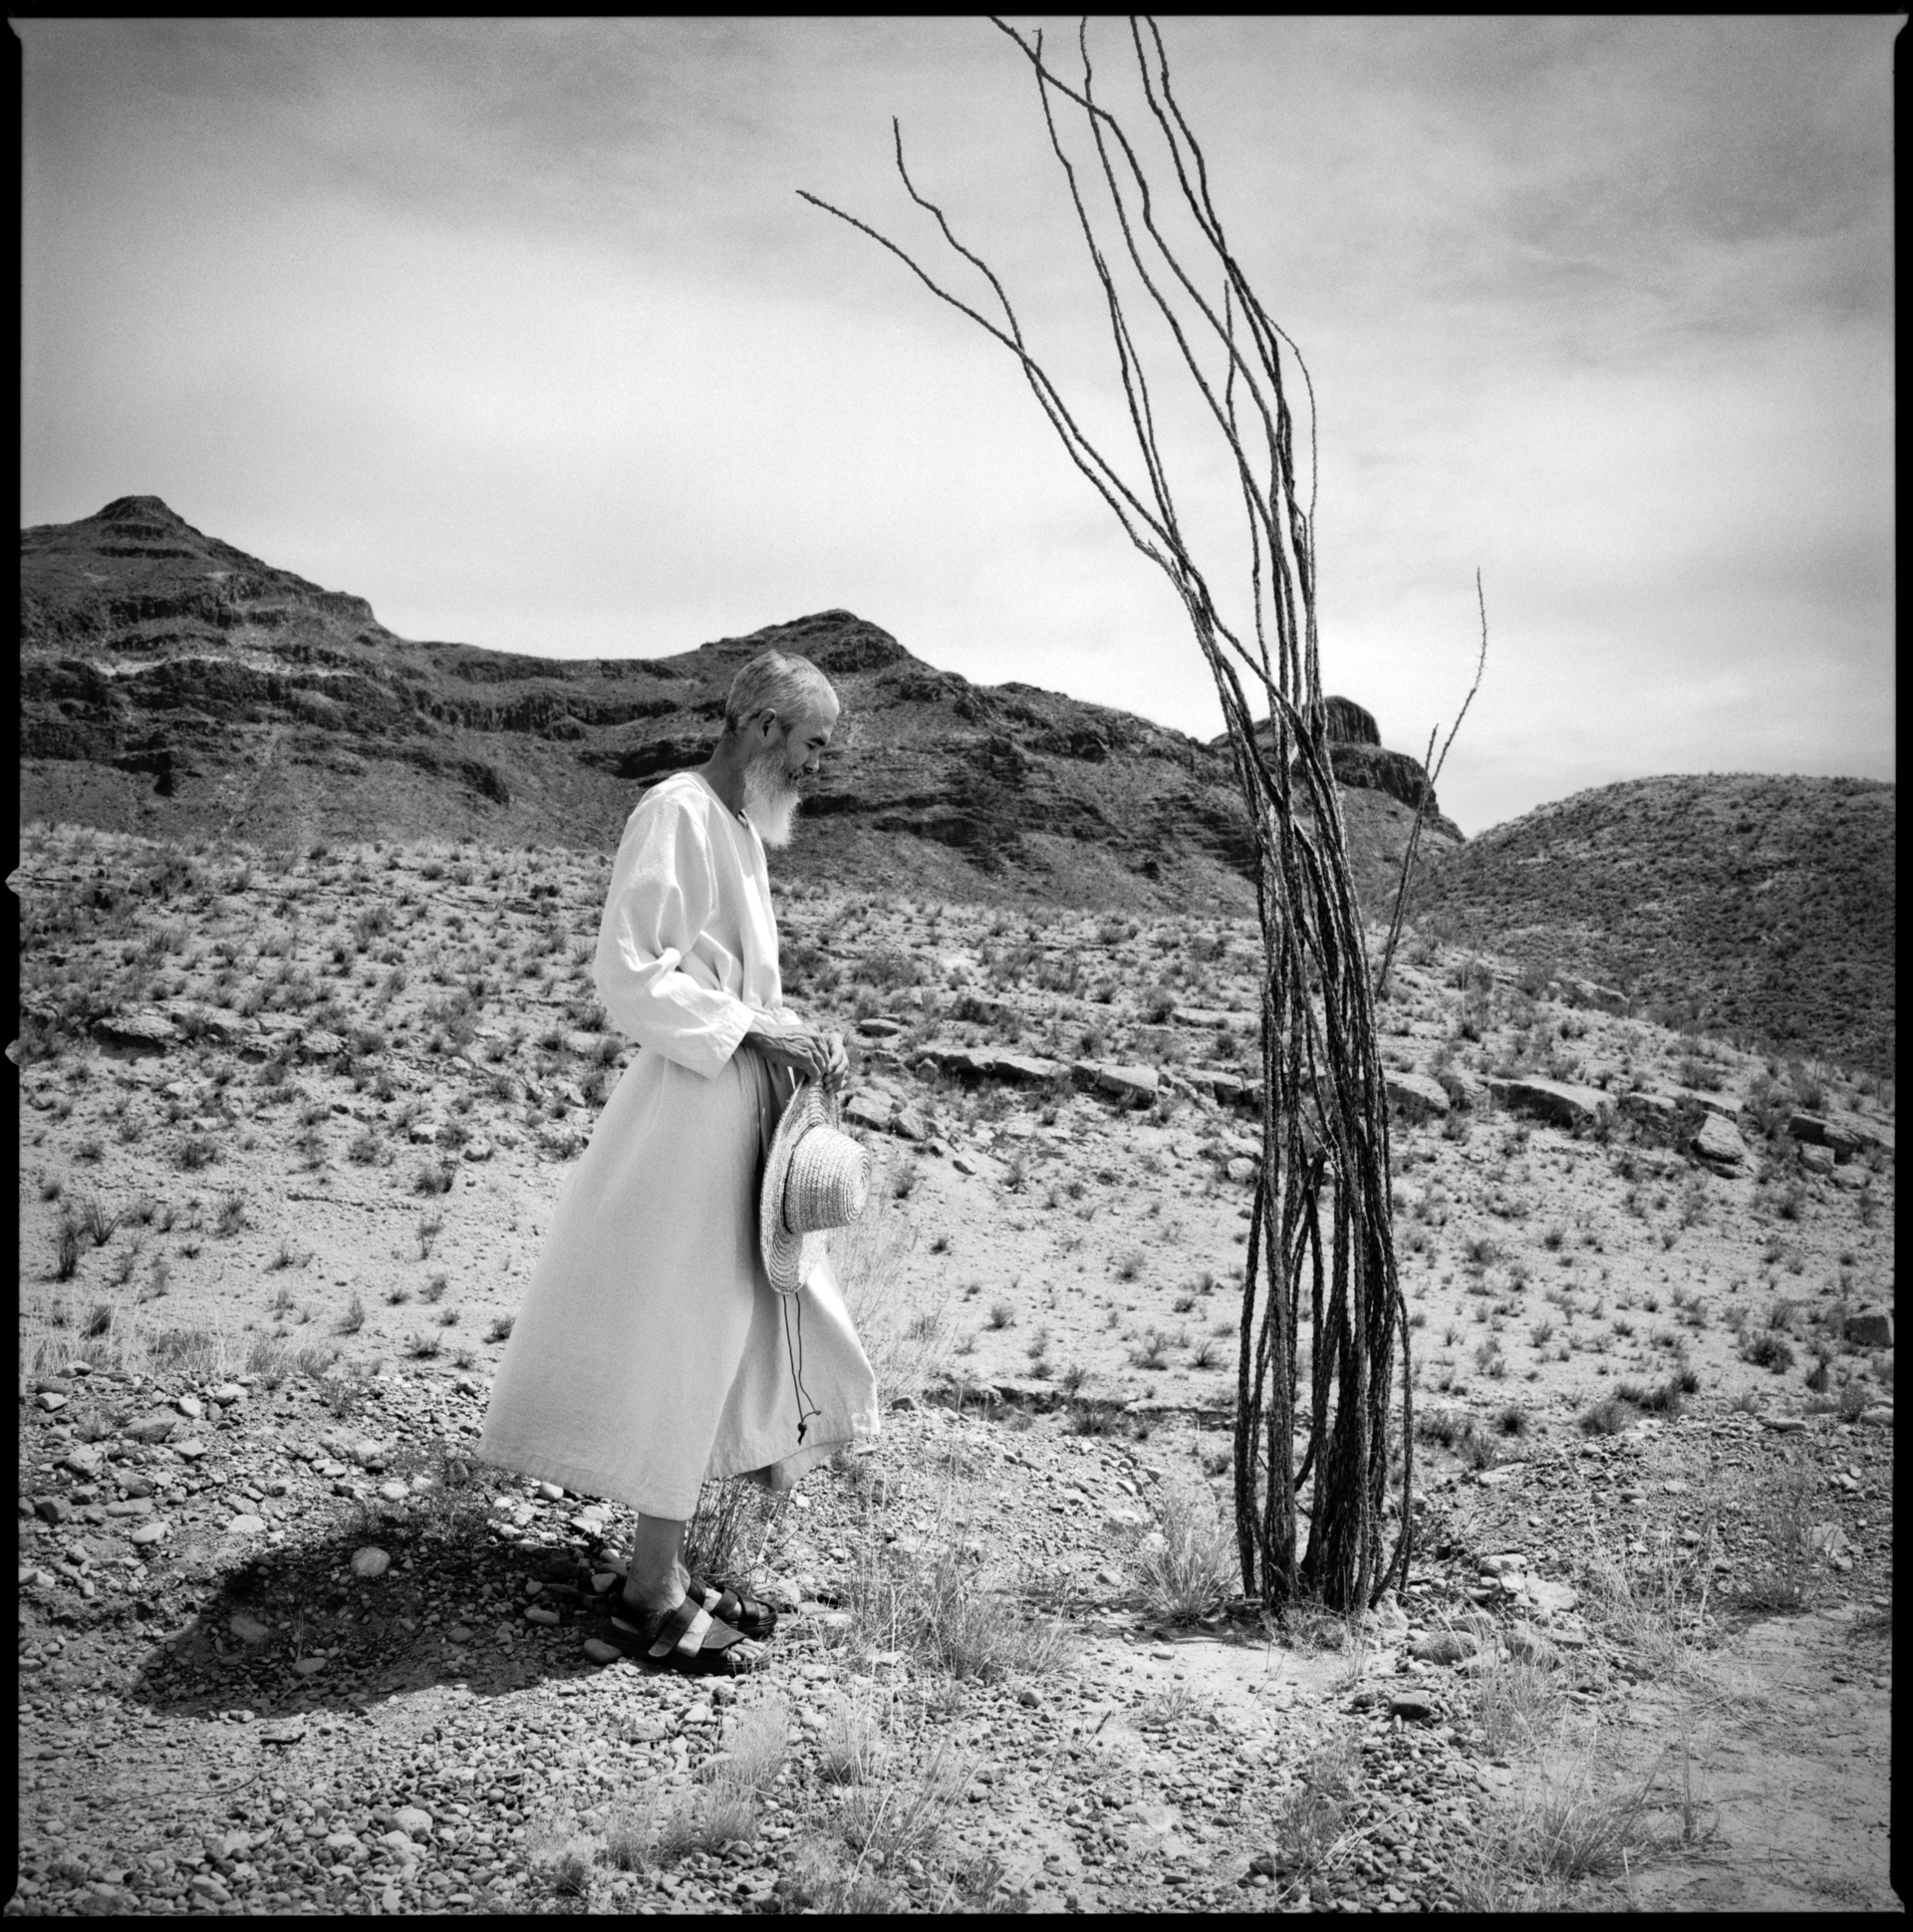 Monk & Ocotillo by Kevin Greenblat